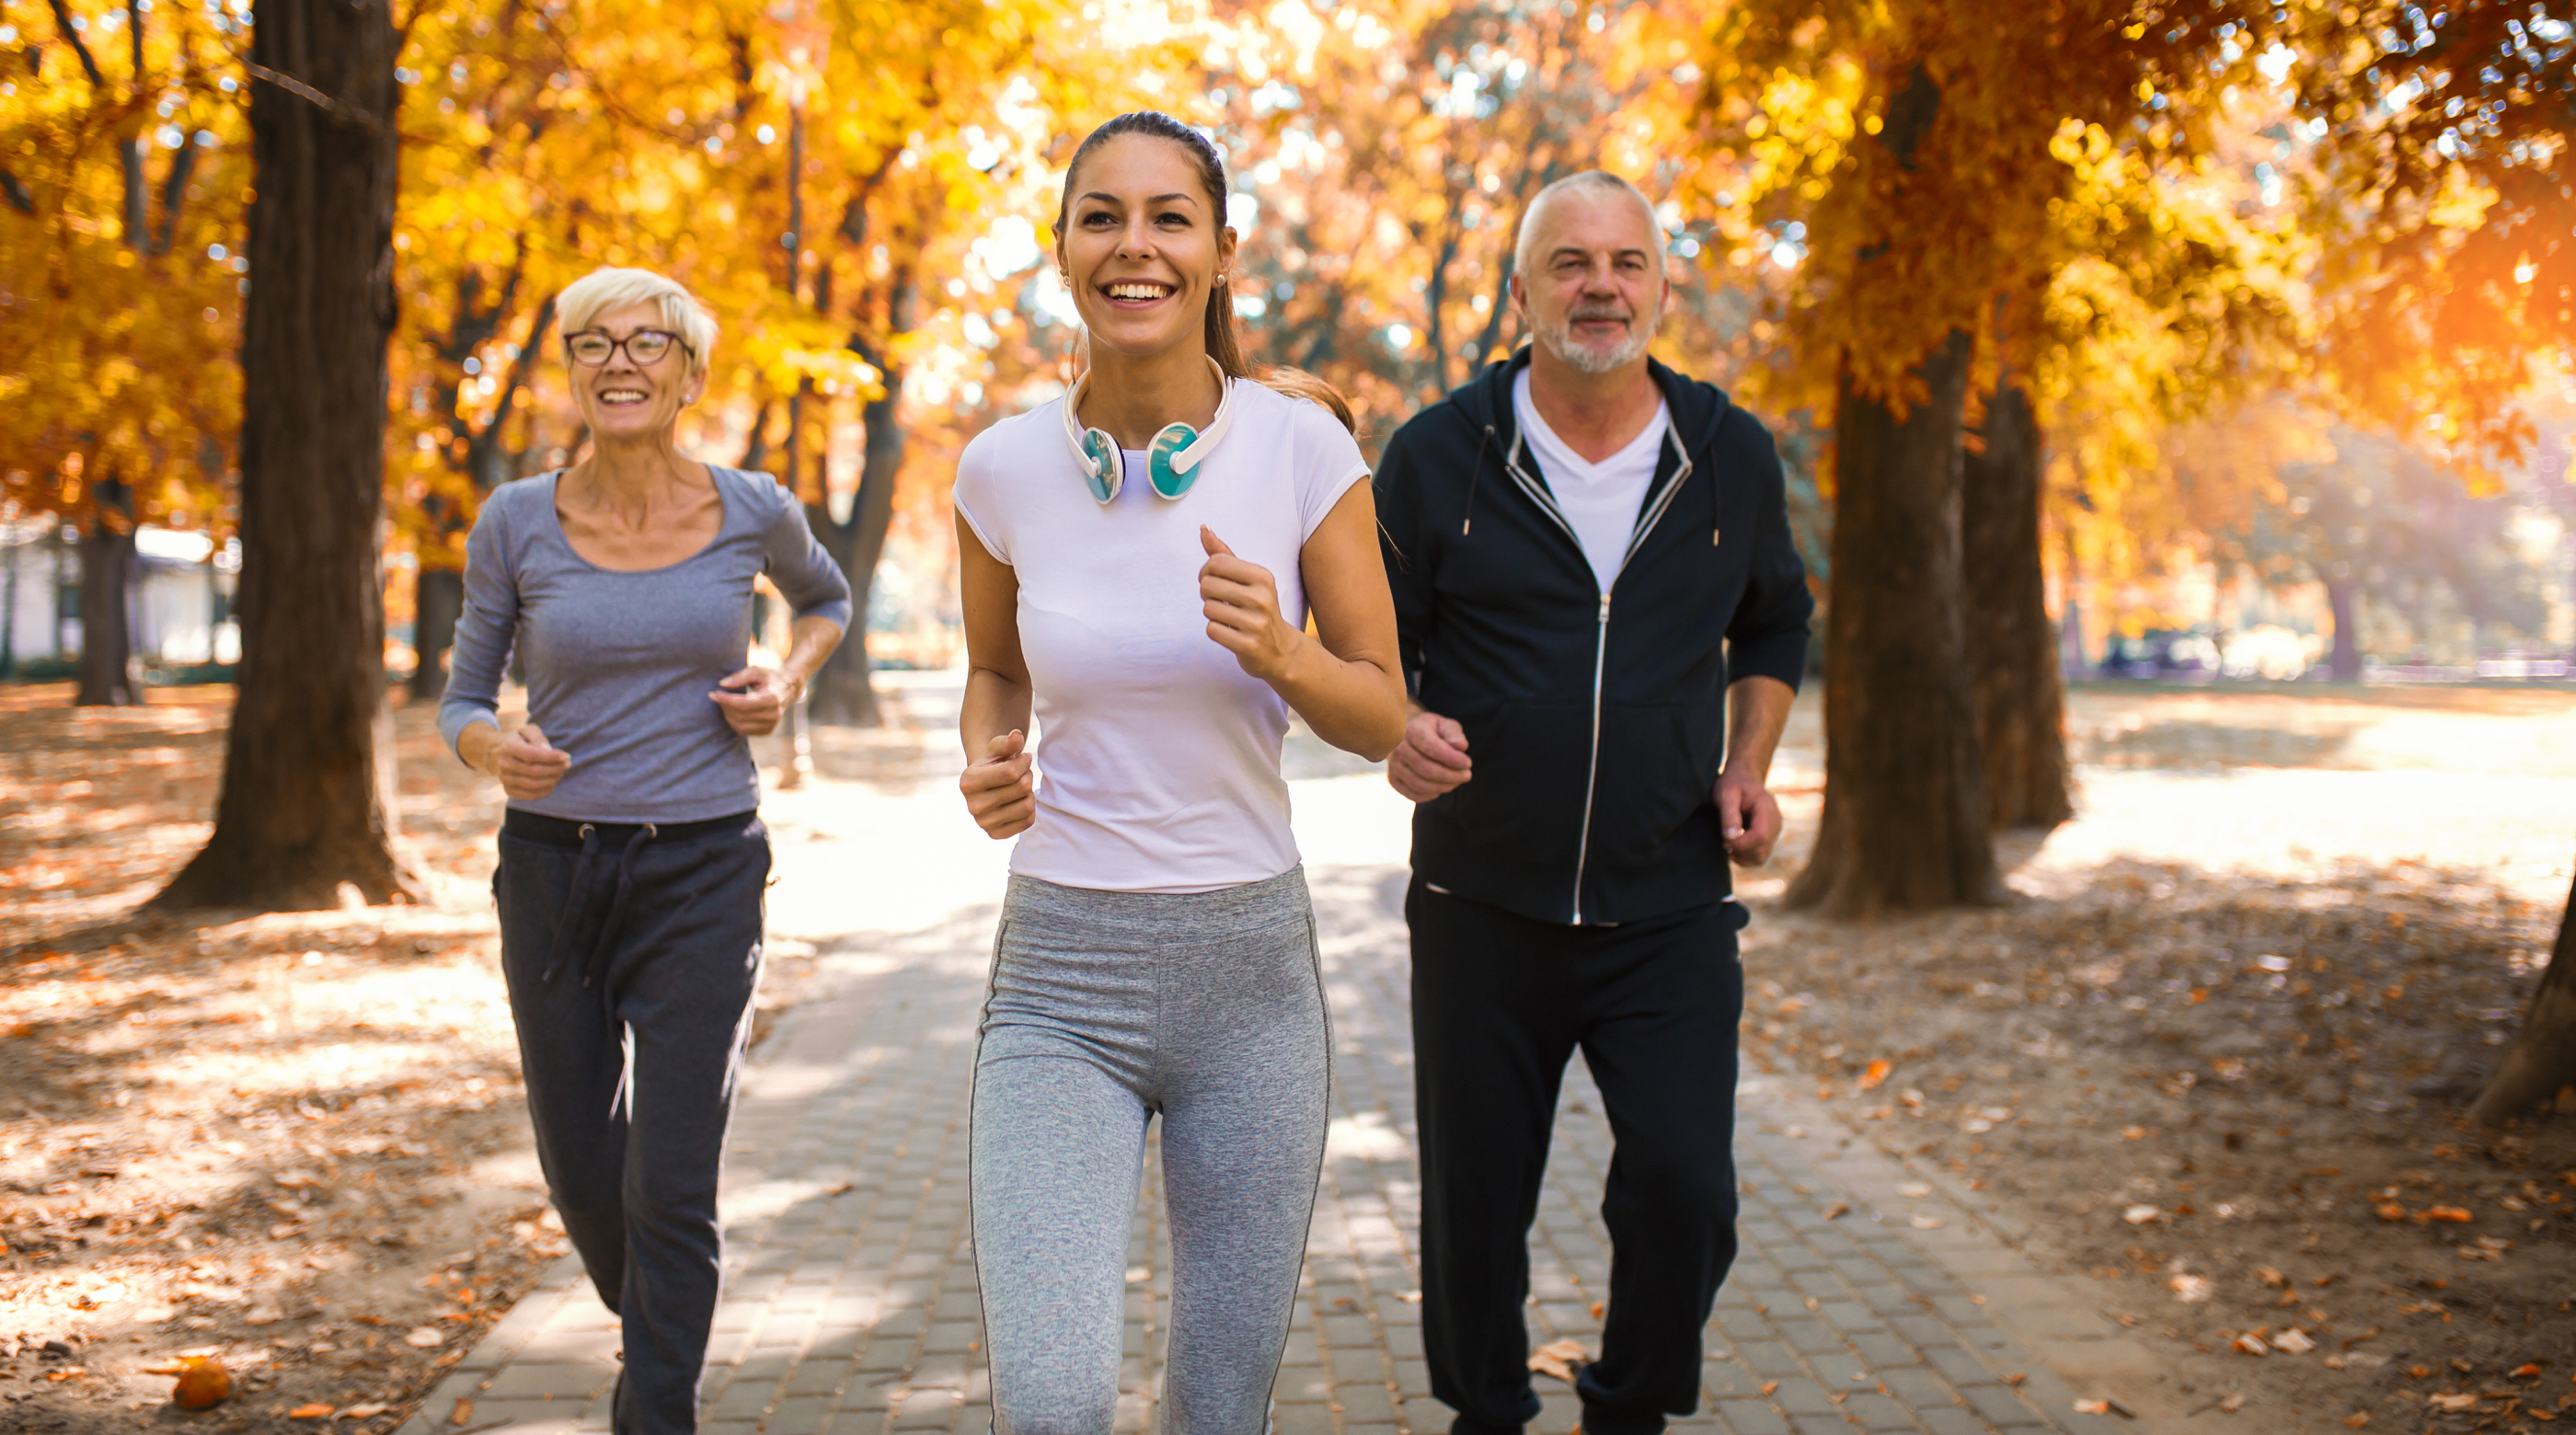 Top 10 Reasons to Stay Active as You Age<h2>[For Patients]</h2>